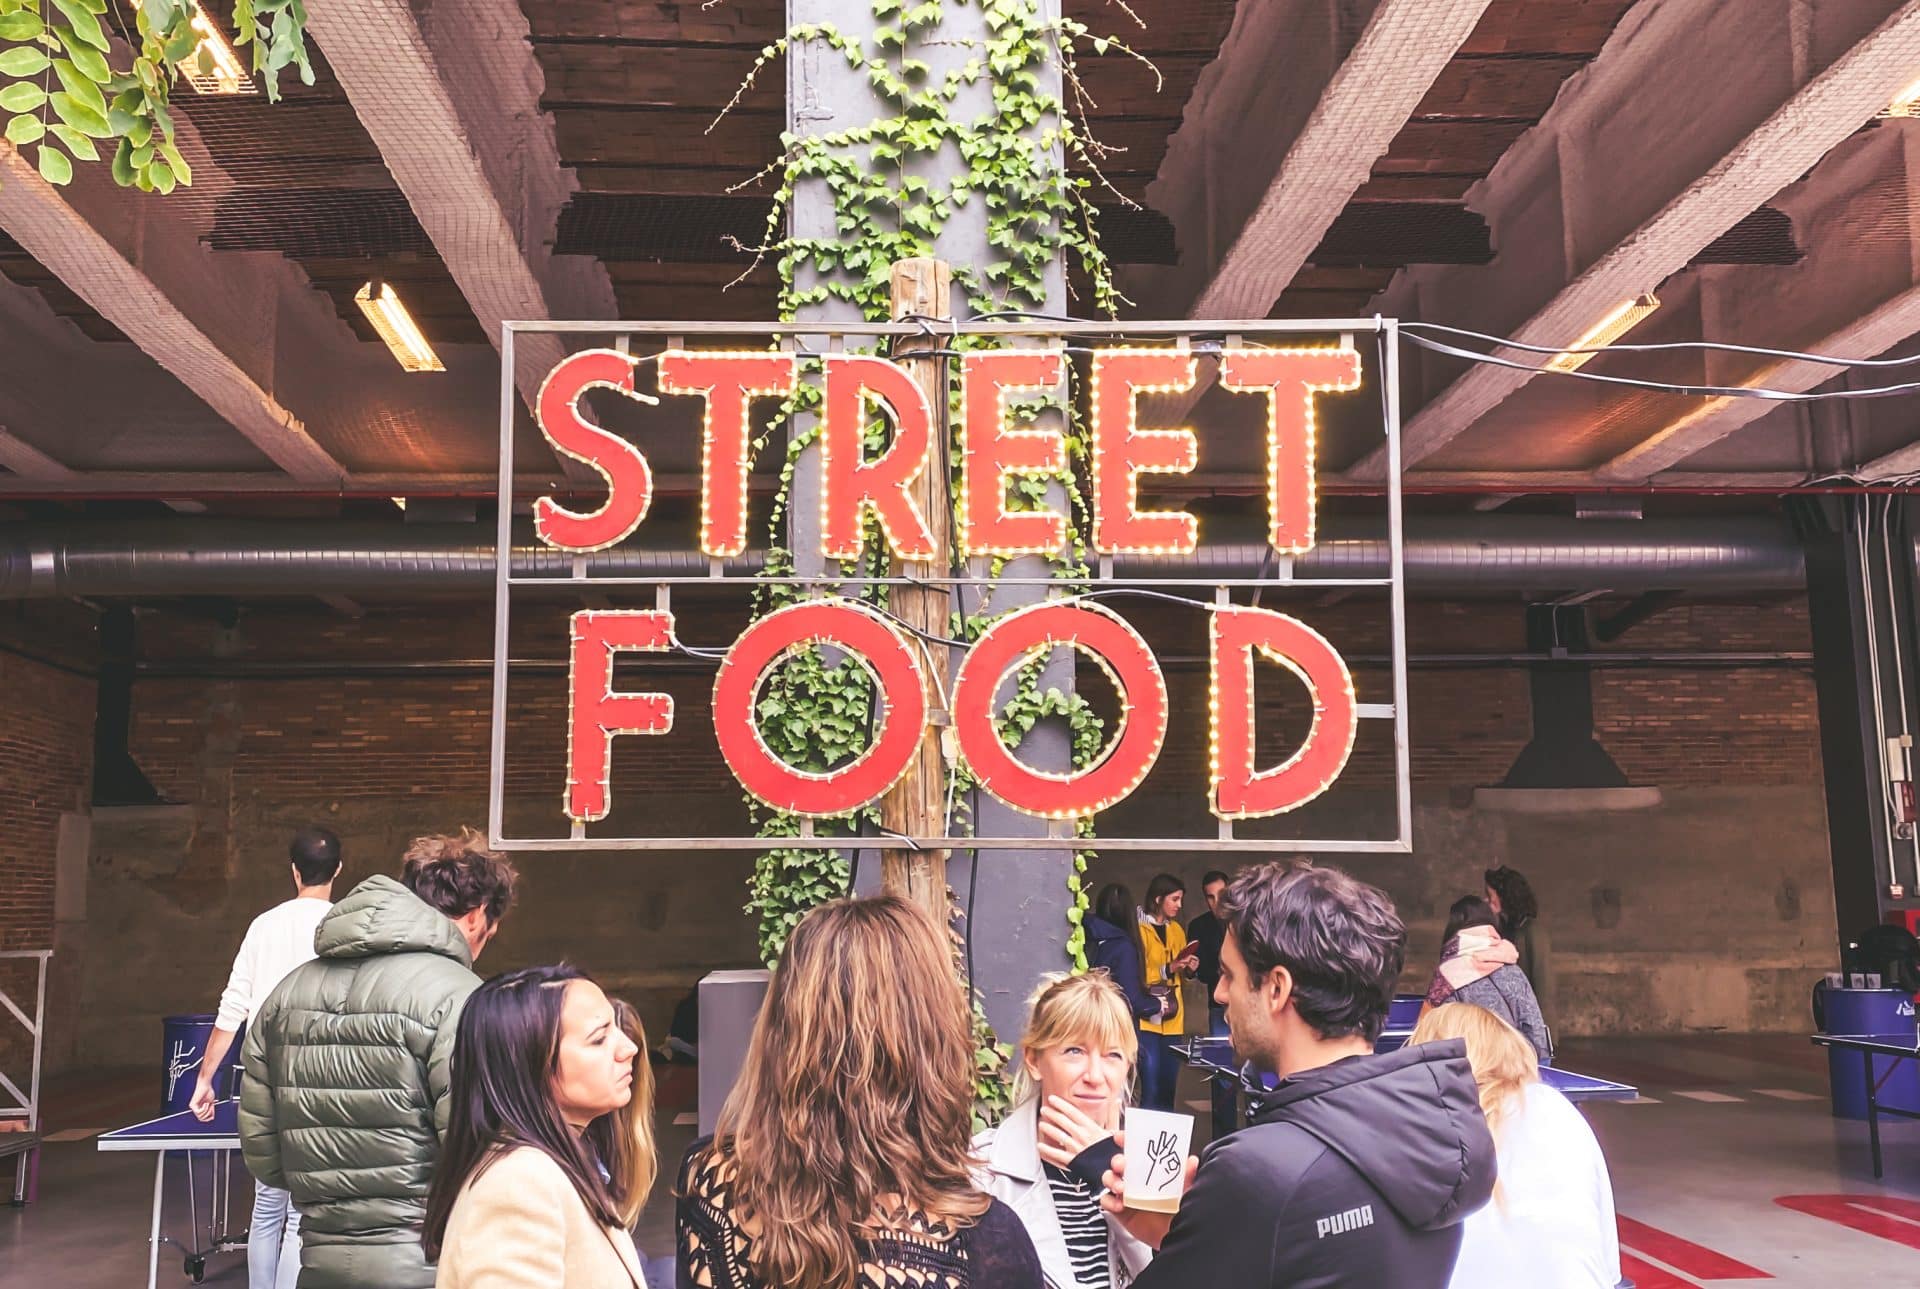 The street food taste in 2019 – will you travel to try it?